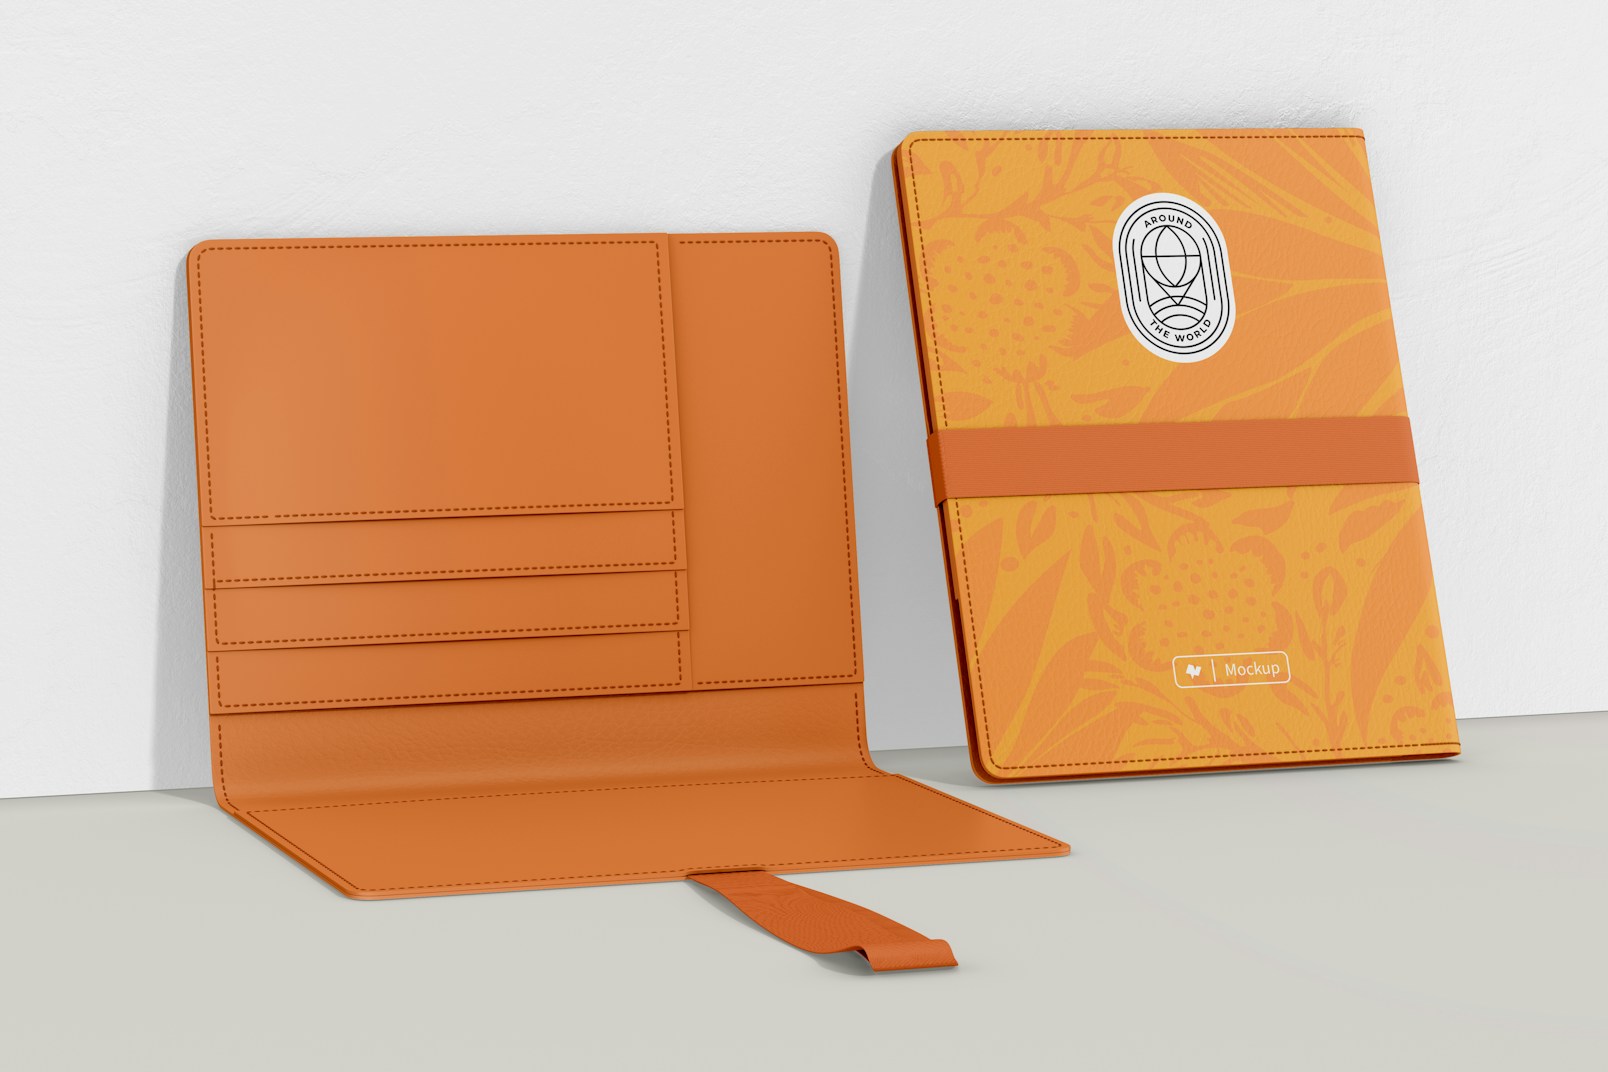 Passport Holders with Band Mockup, Leaned and Opened